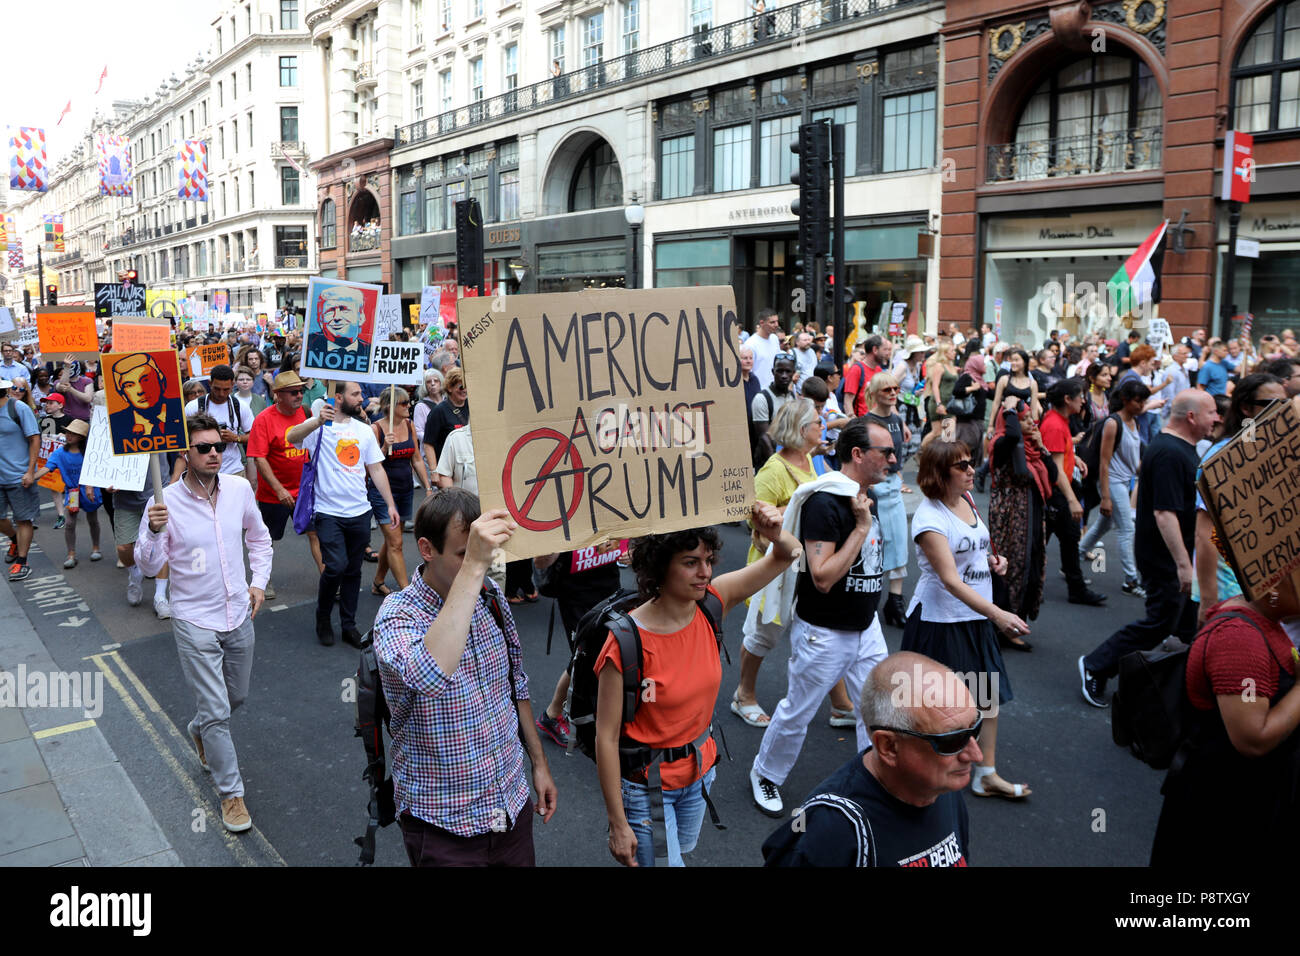 London, UK – July 13, 2018: Demonstrators march down Regent Street in central London to protest against US president Donald Trump, during his visit to the country Credit: Dominic Dudley/Alamy Live News Stock Photo